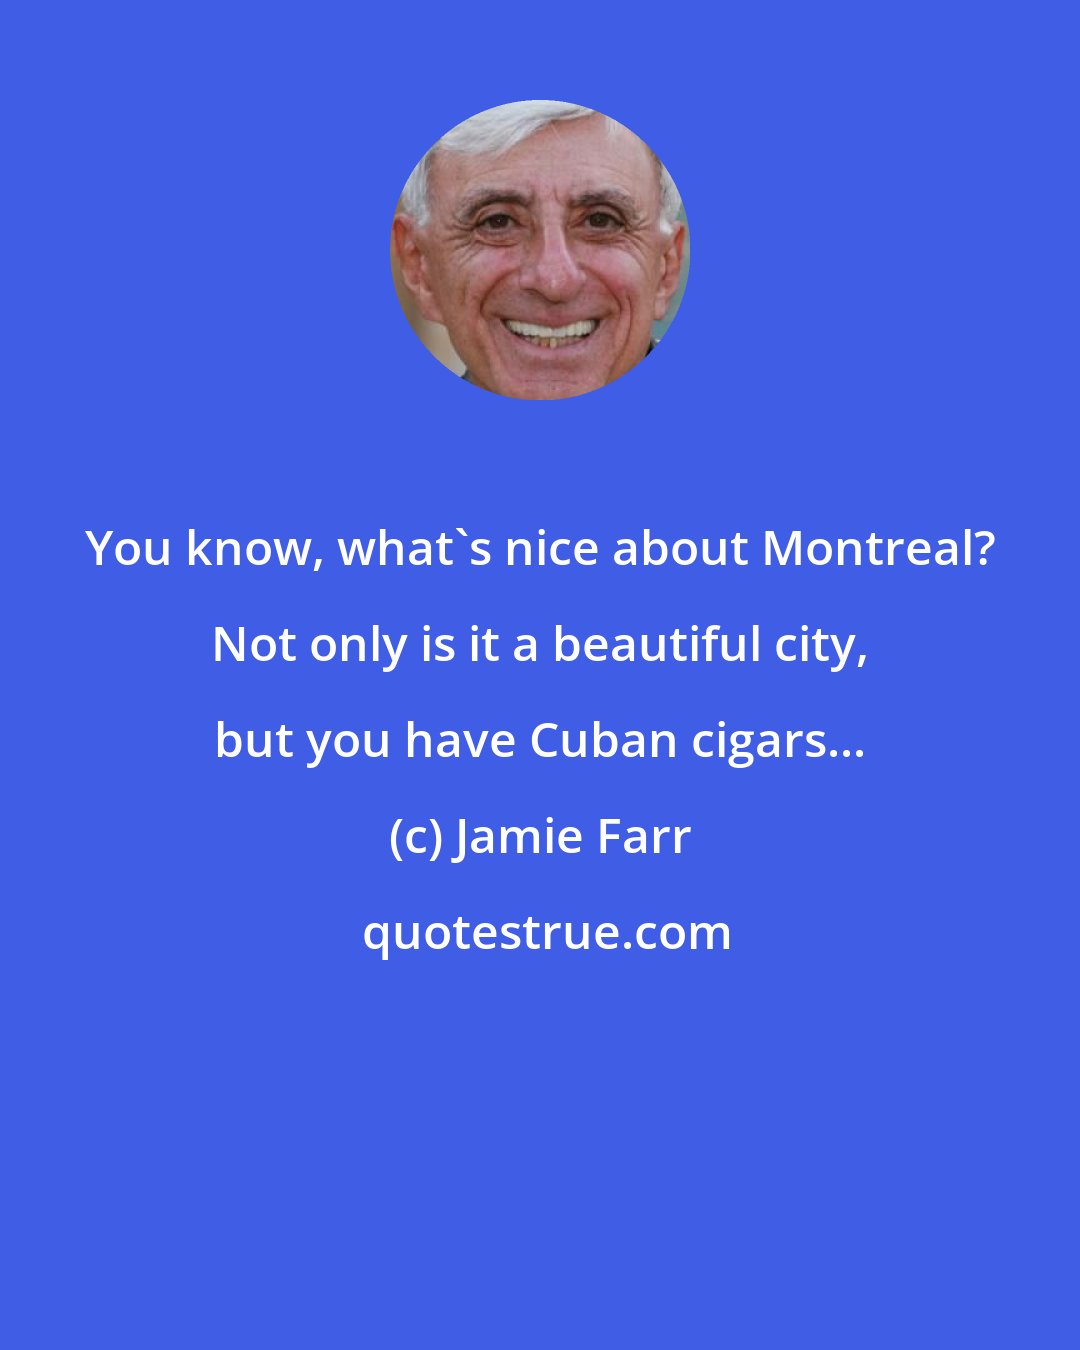 Jamie Farr: You know, what's nice about Montreal? Not only is it a beautiful city, but you have Cuban cigars...